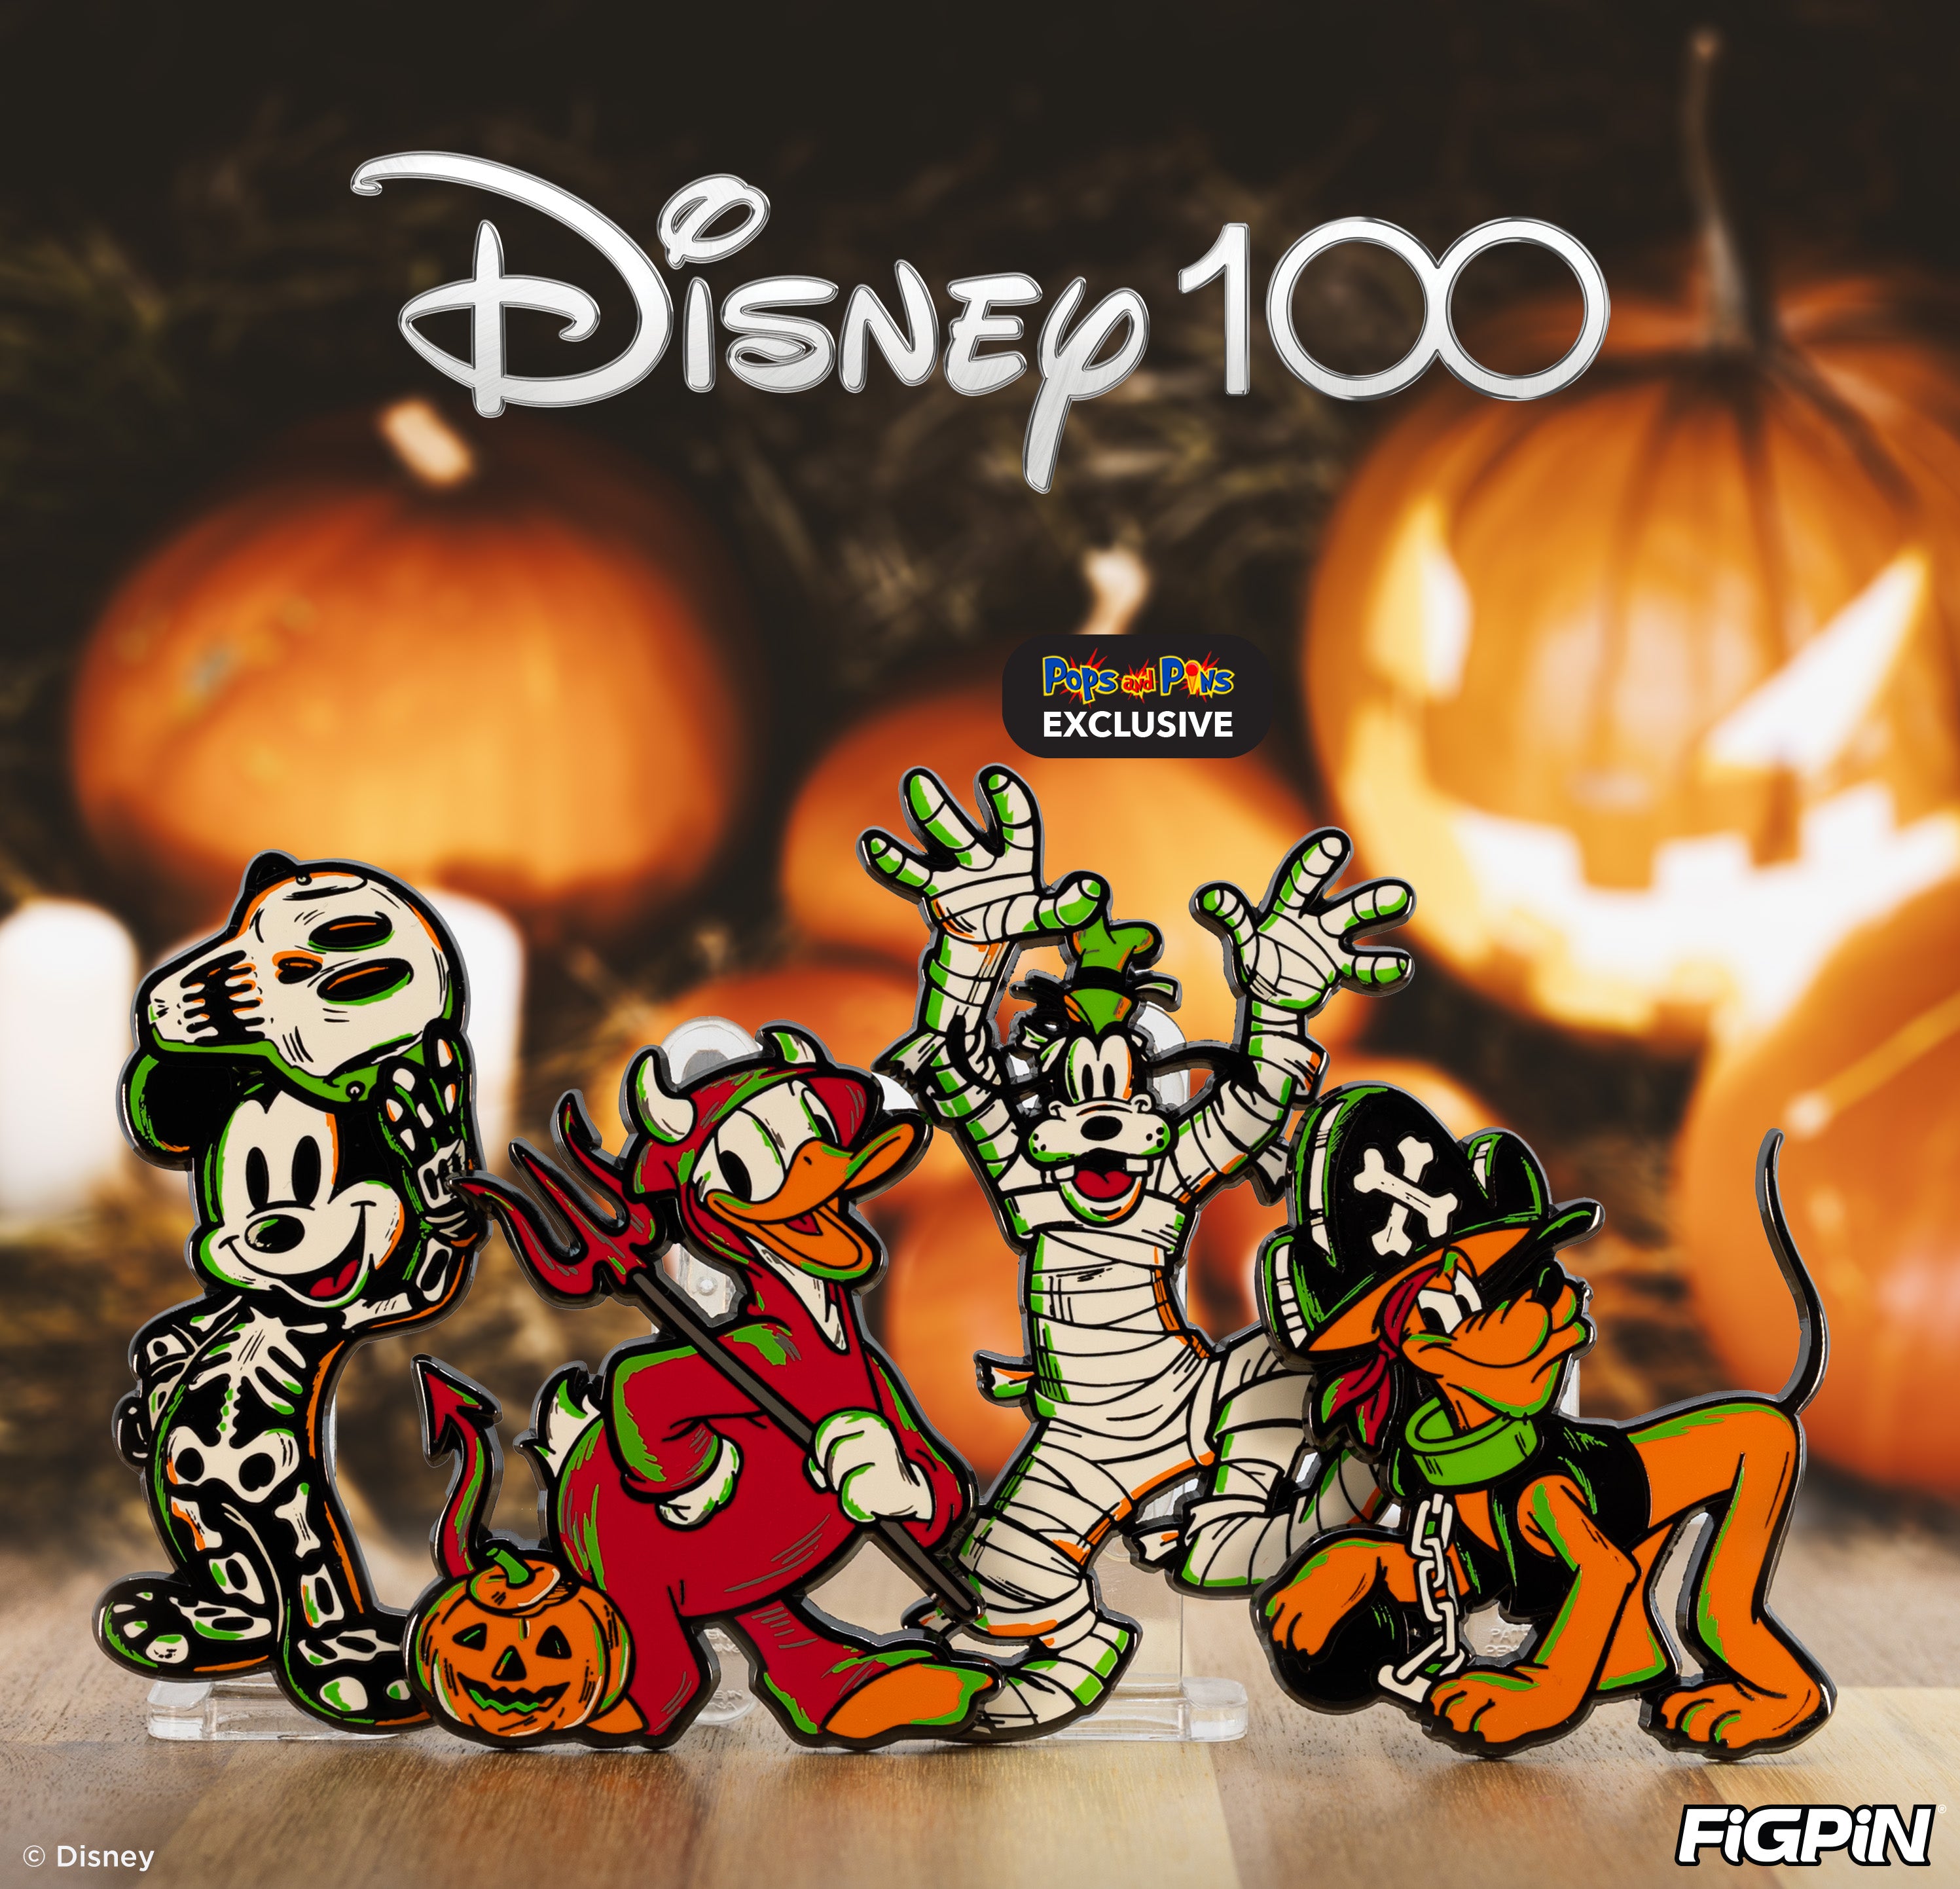 Photograph of Disney 100 characters available as enamel pins in this Disney 100 FiGPiN wave release